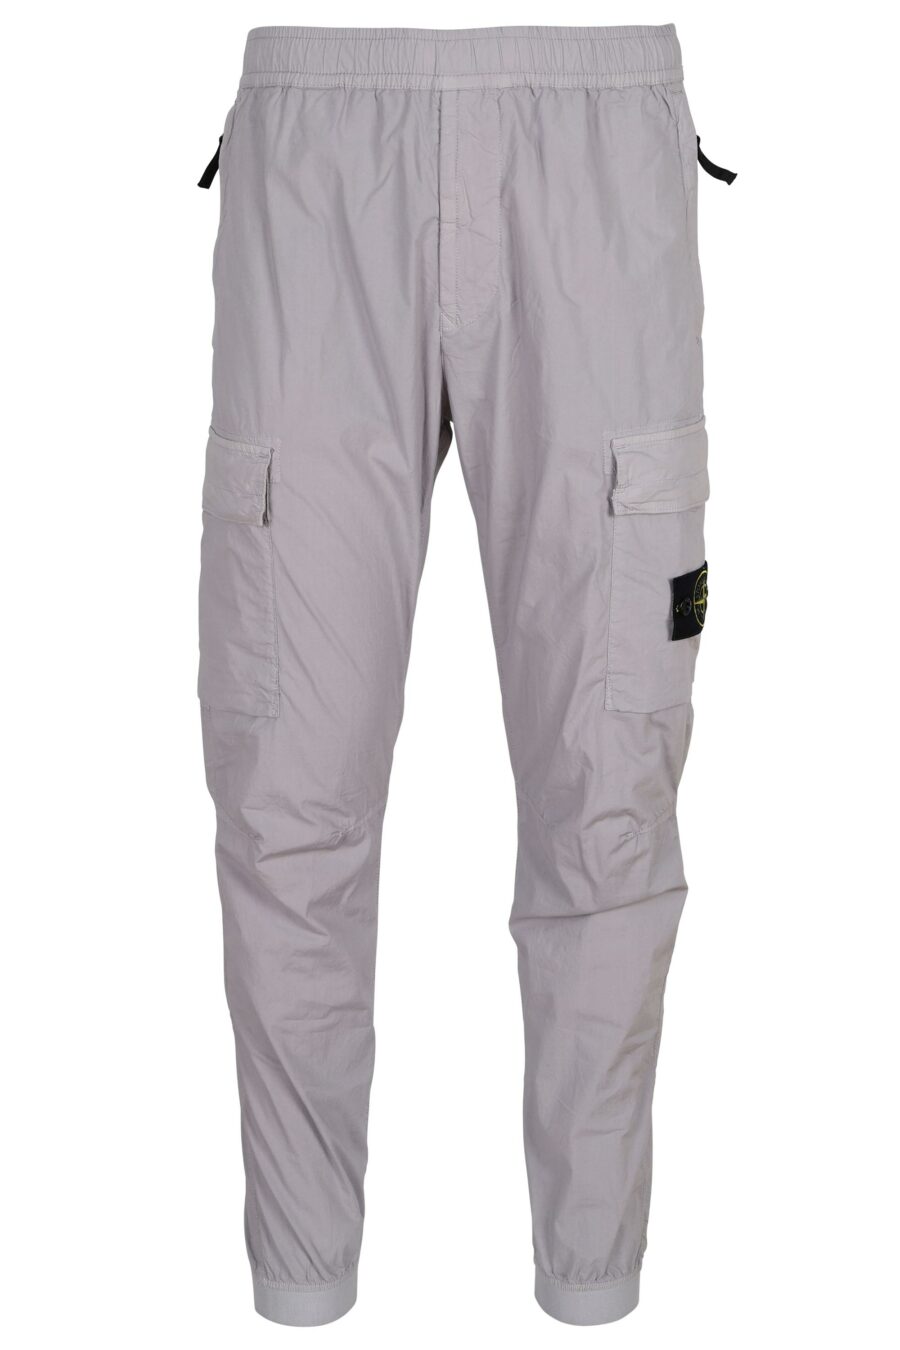 Lilac grey tapered trousers with logo compass patch - 8052572926846